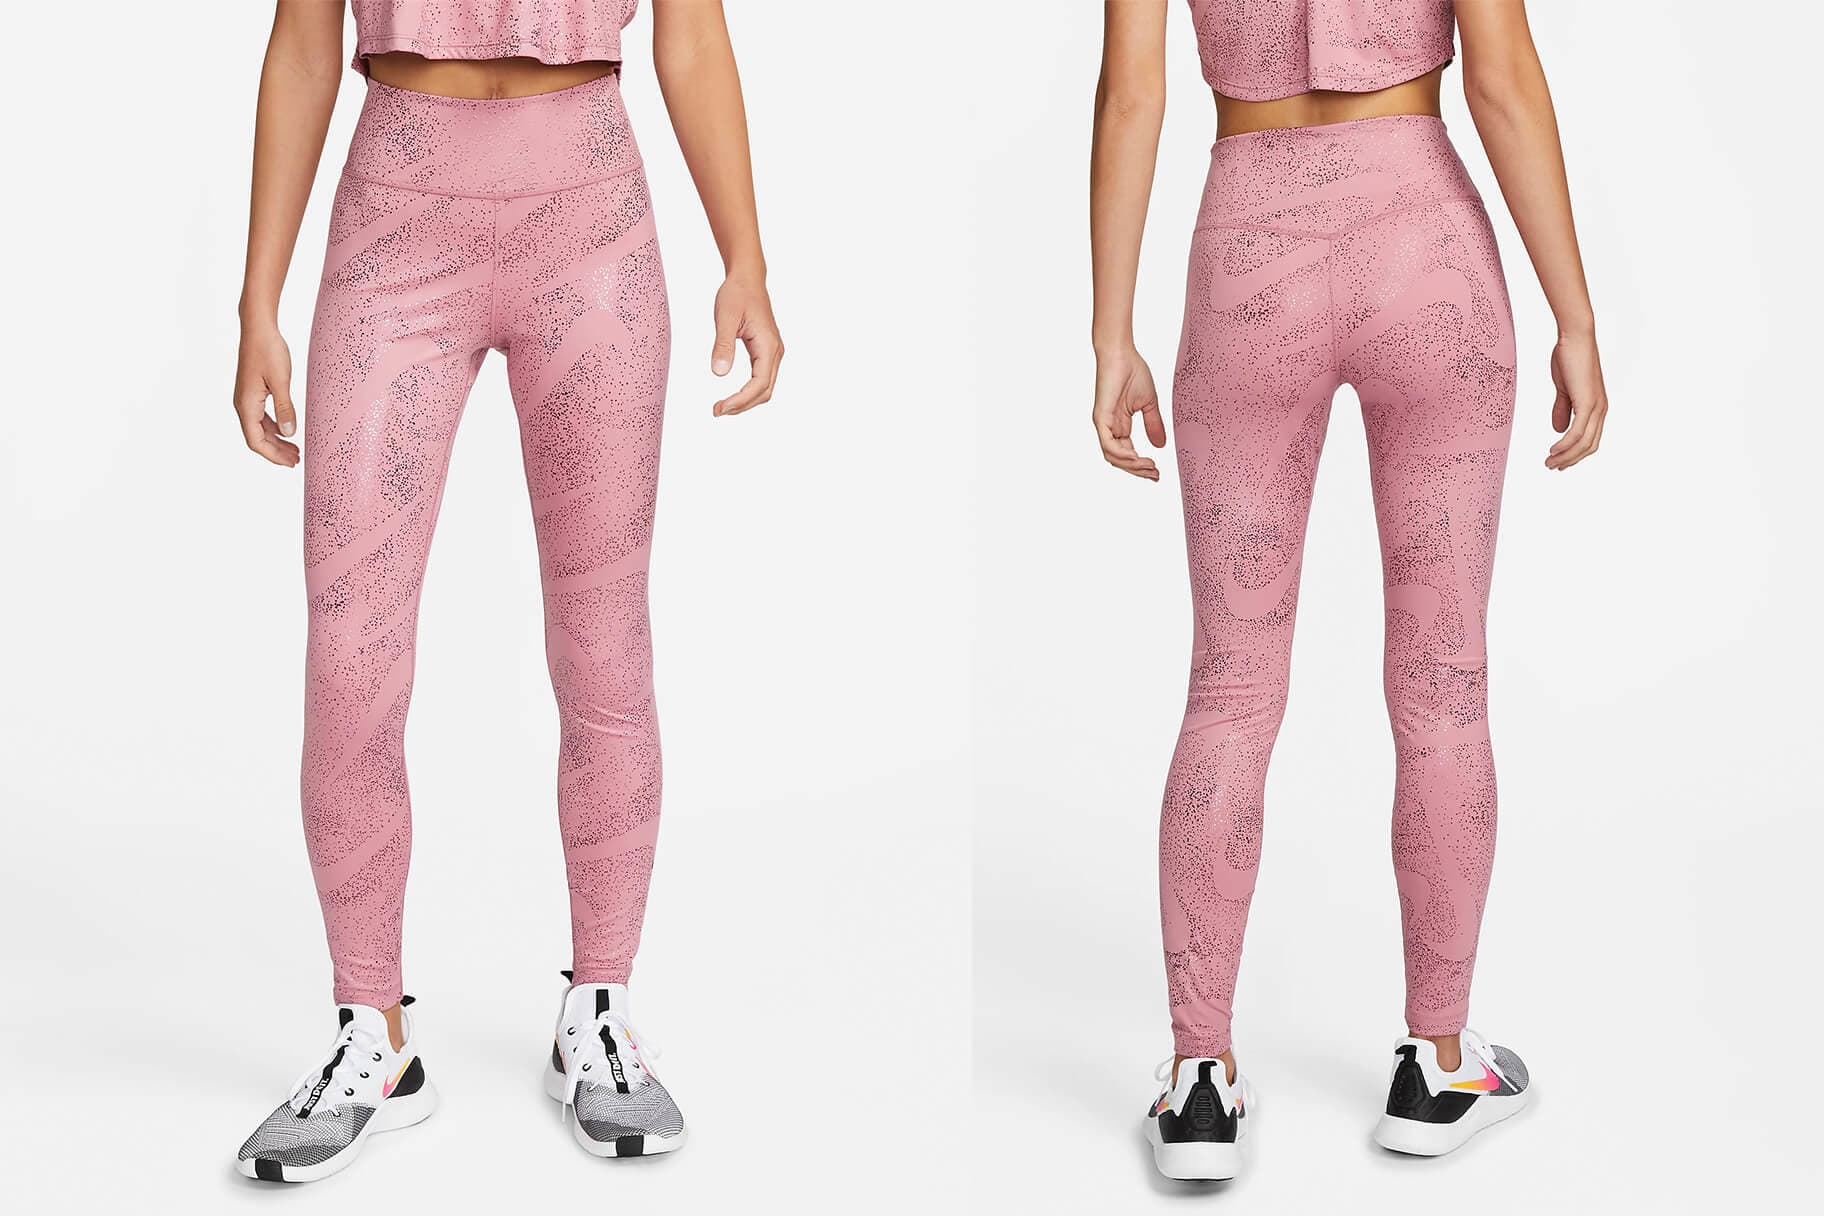 https://static.nike.com/a/images/f_auto,cs_srgb/w_1920,c_limit/8e6ee170-e5d4-47fa-8bc1-9ddc70674f29/5-pink-leggings-from-nike-for-every-workout.jpg